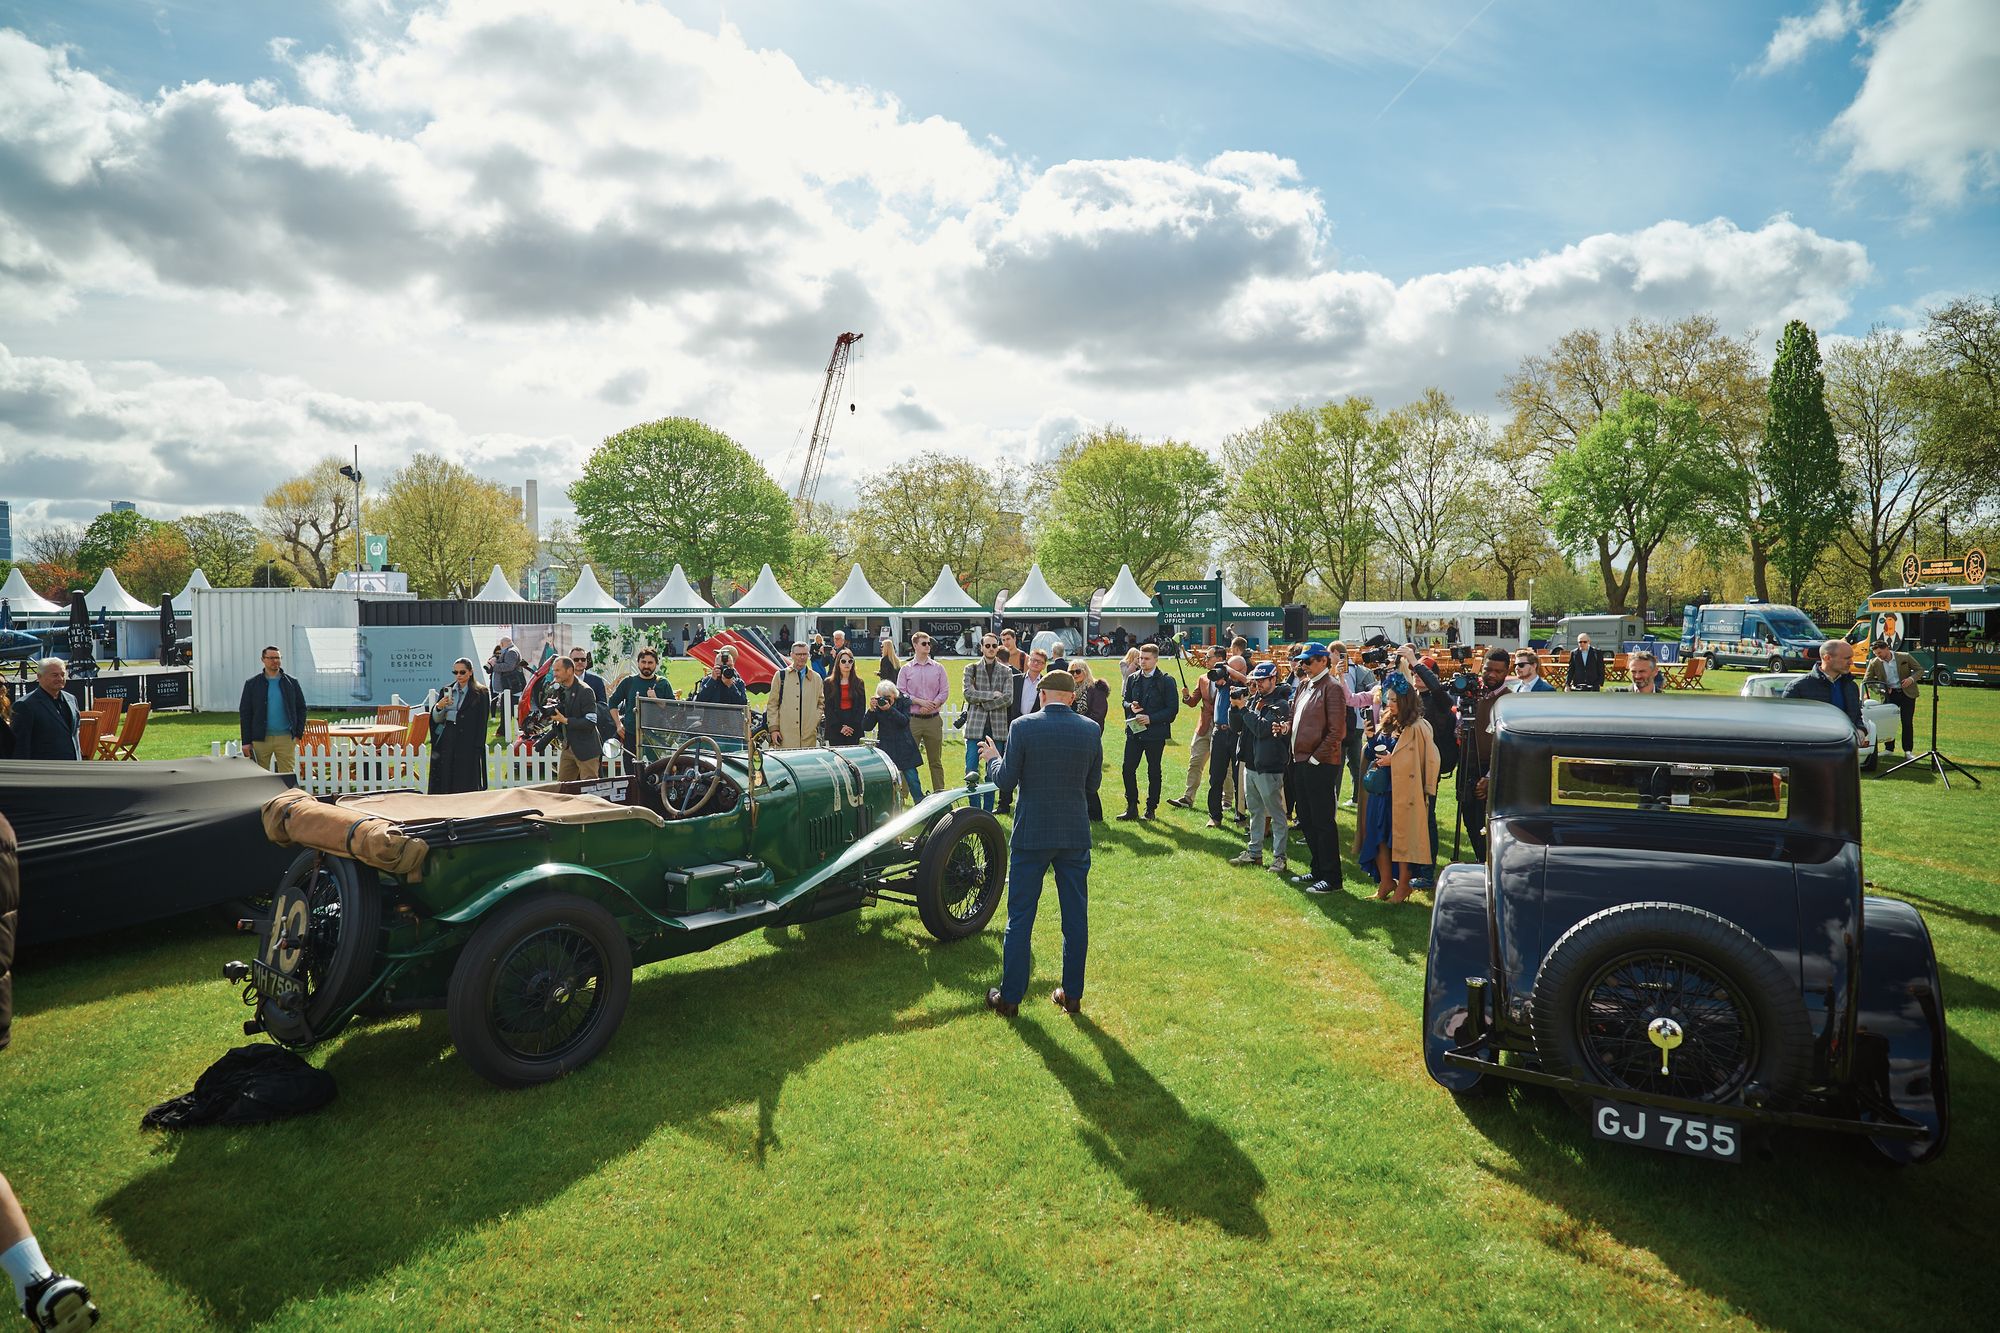 Launching The Ultimate Collection at Salon Privé London